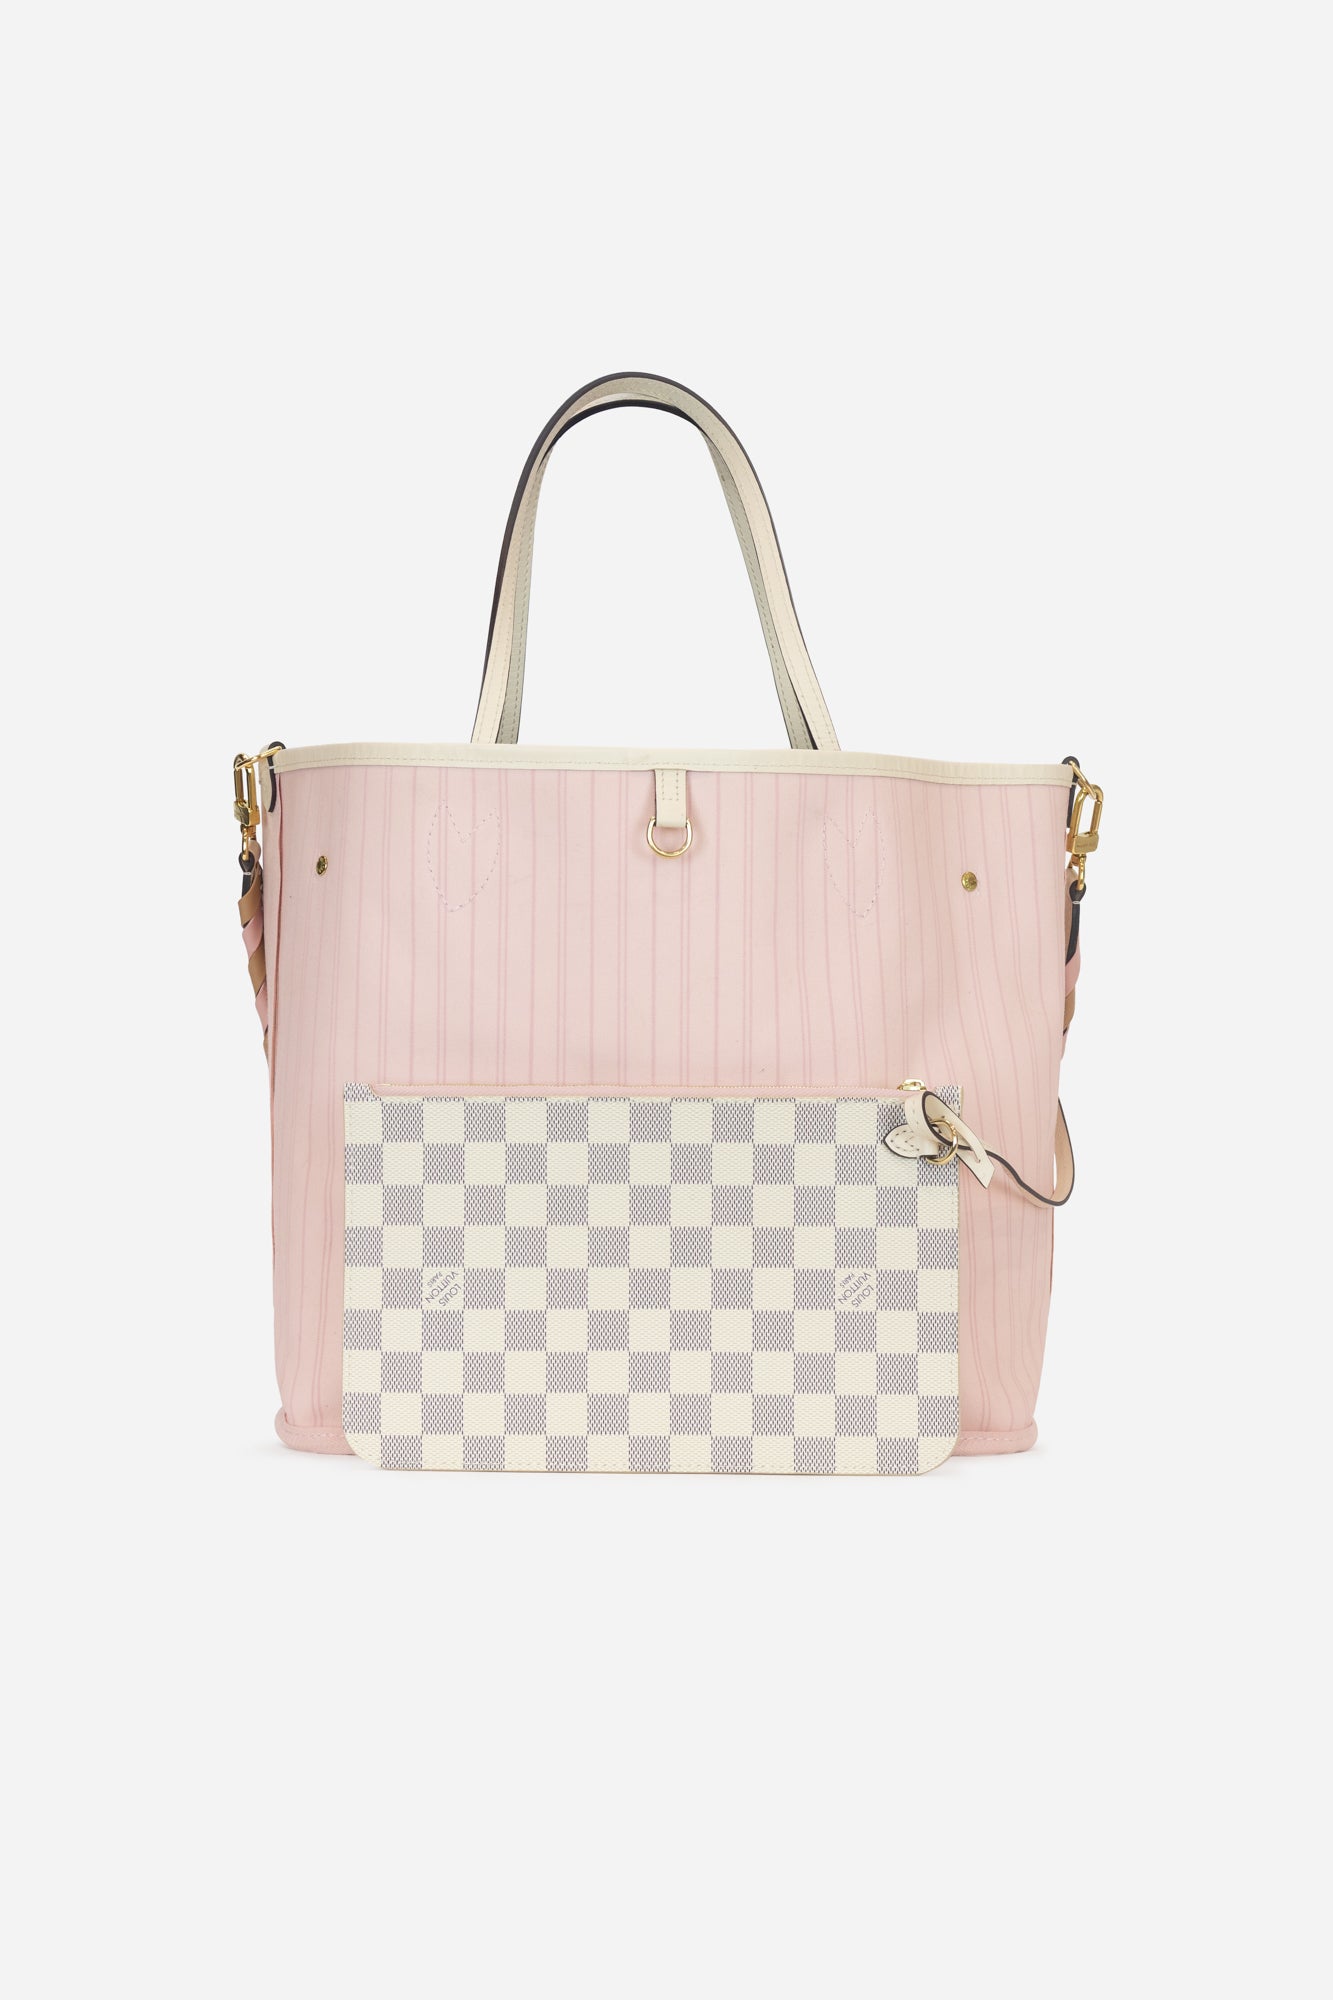 Damier Azur Neverfull MM Limited Edition with Cross Strap